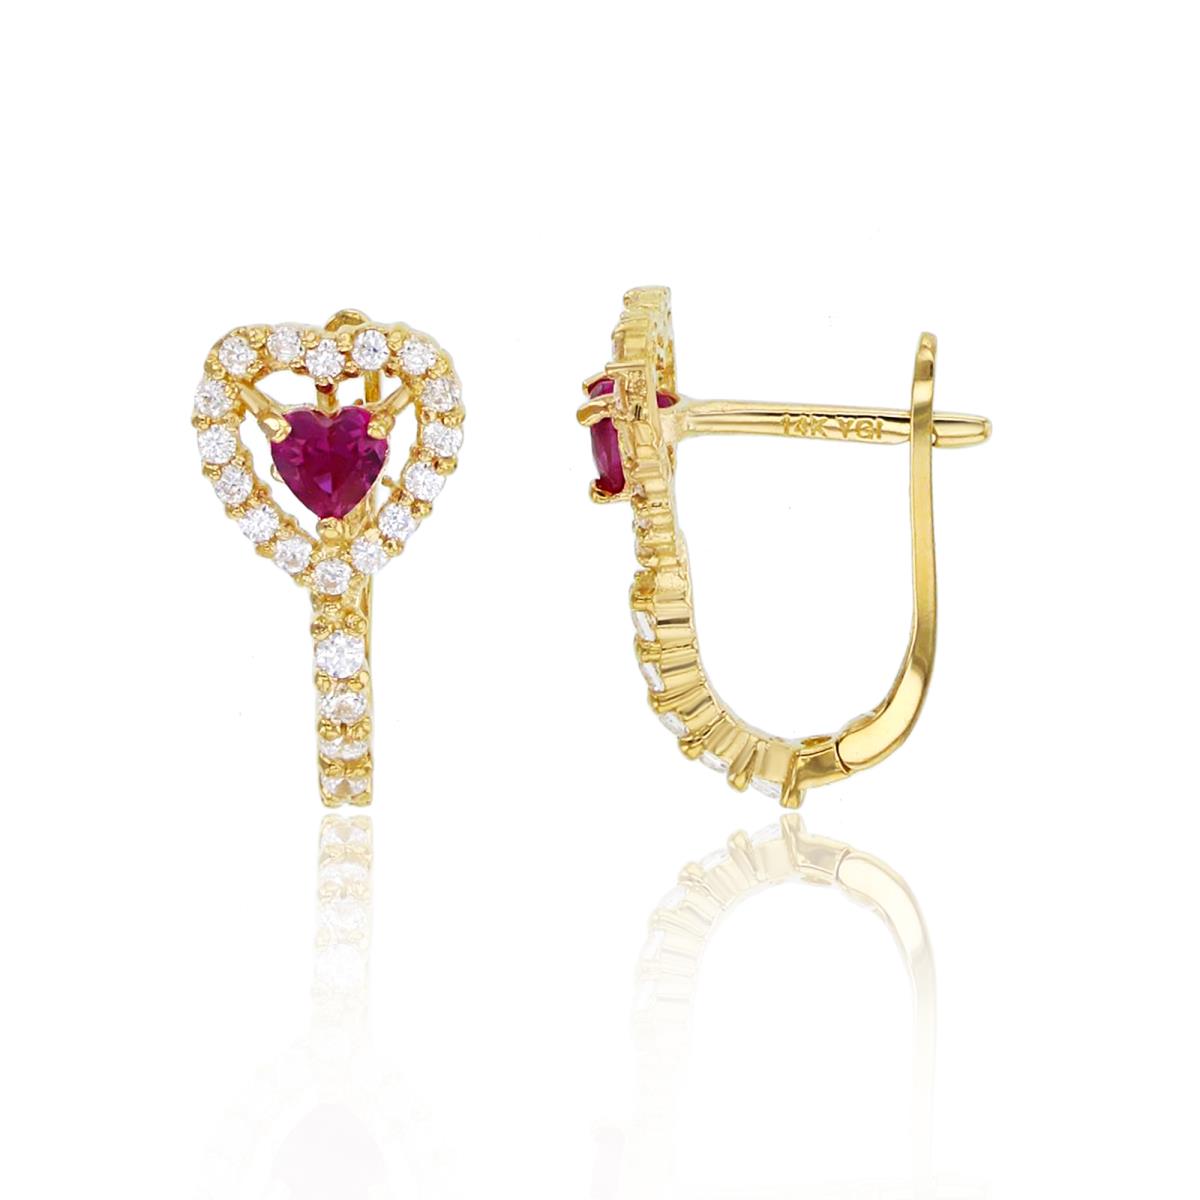 10K Yellow Gold Rnd White & 3mm HS Ruby CZ Heart Earrings with Latch Backs